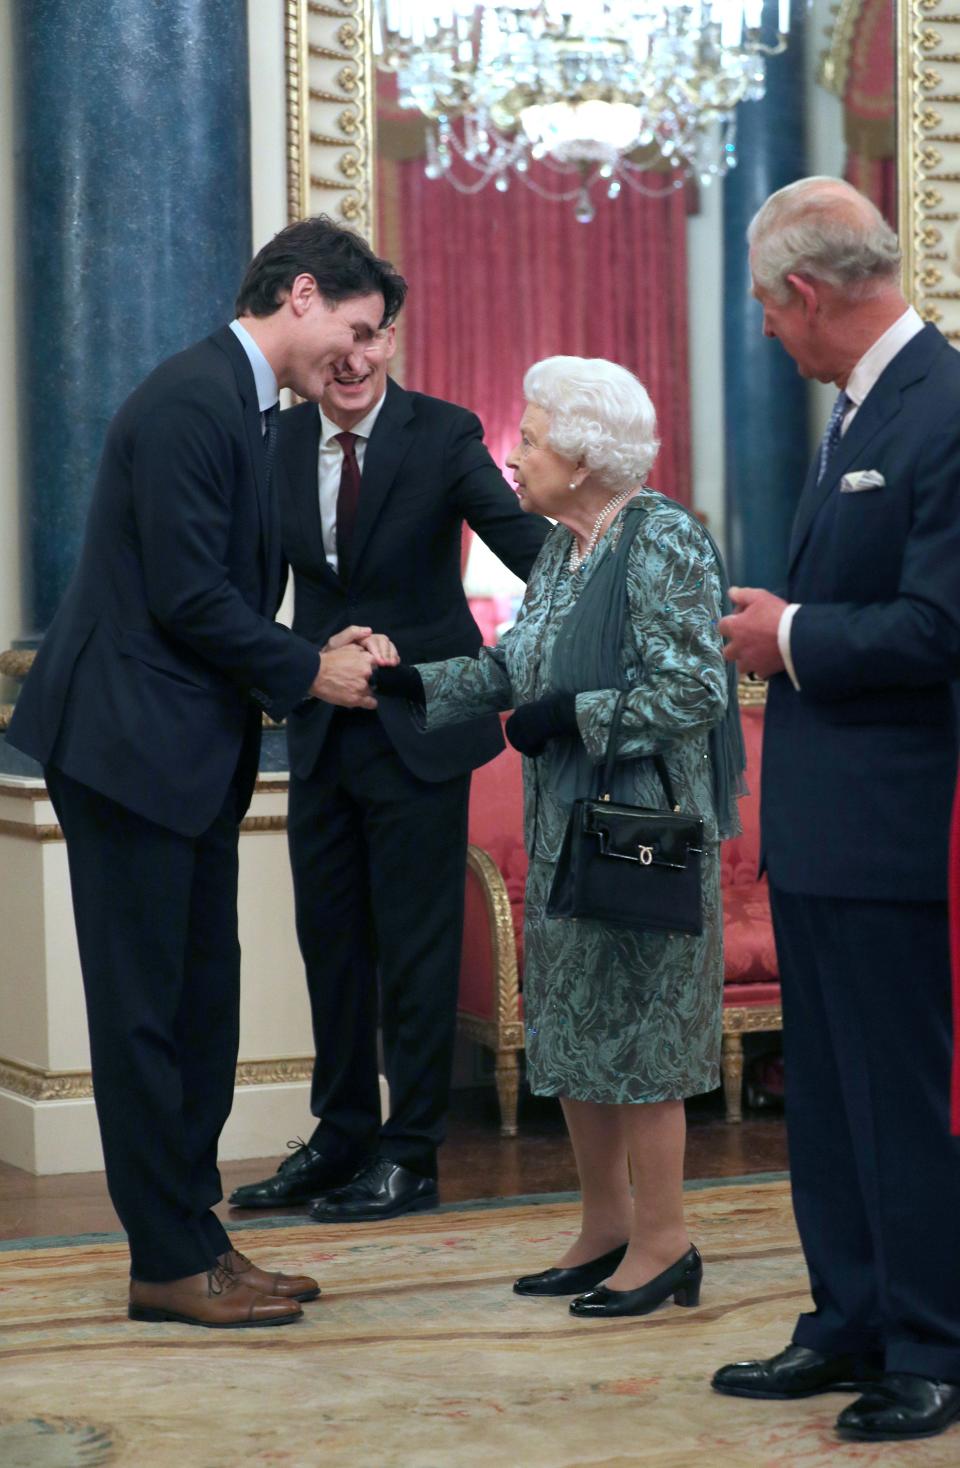 Britain's Prince Charles, Prince of Wales (R) looks on as Britain's Queen Elizabeth II meets Canada's Prime Minister Justin Trudeau (L) at Buckingham Palace in central London on December 3, 2019, during a reception hosted by Britain's Queen Elizabeth II ahead of the NATO alliance summit. - NATO leaders gather Tuesday for a summit to mark the alliance's 70th anniversary but with leaders feuding and name-calling over money and strategy, the mood is far from festive. (Photo by Yui Mok / POOL / AFP) (Photo by YUI MOK/POOL/AFP via Getty Images)